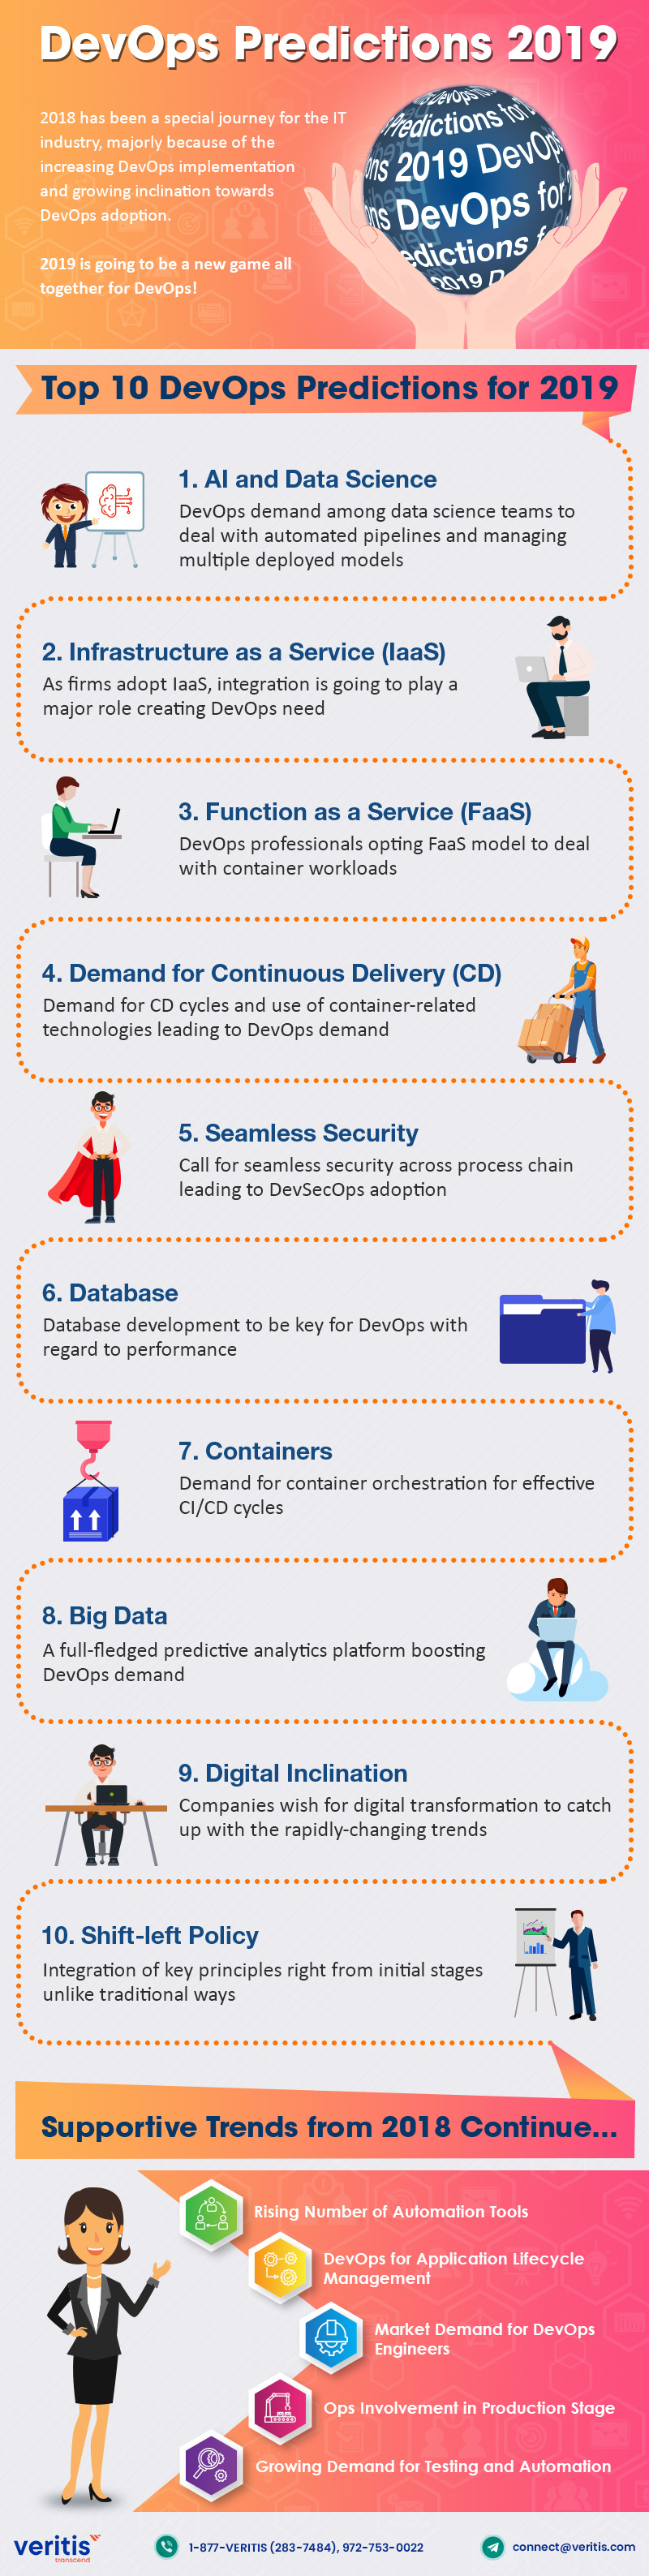 DevOps Predictions for 2019 IT Infographic